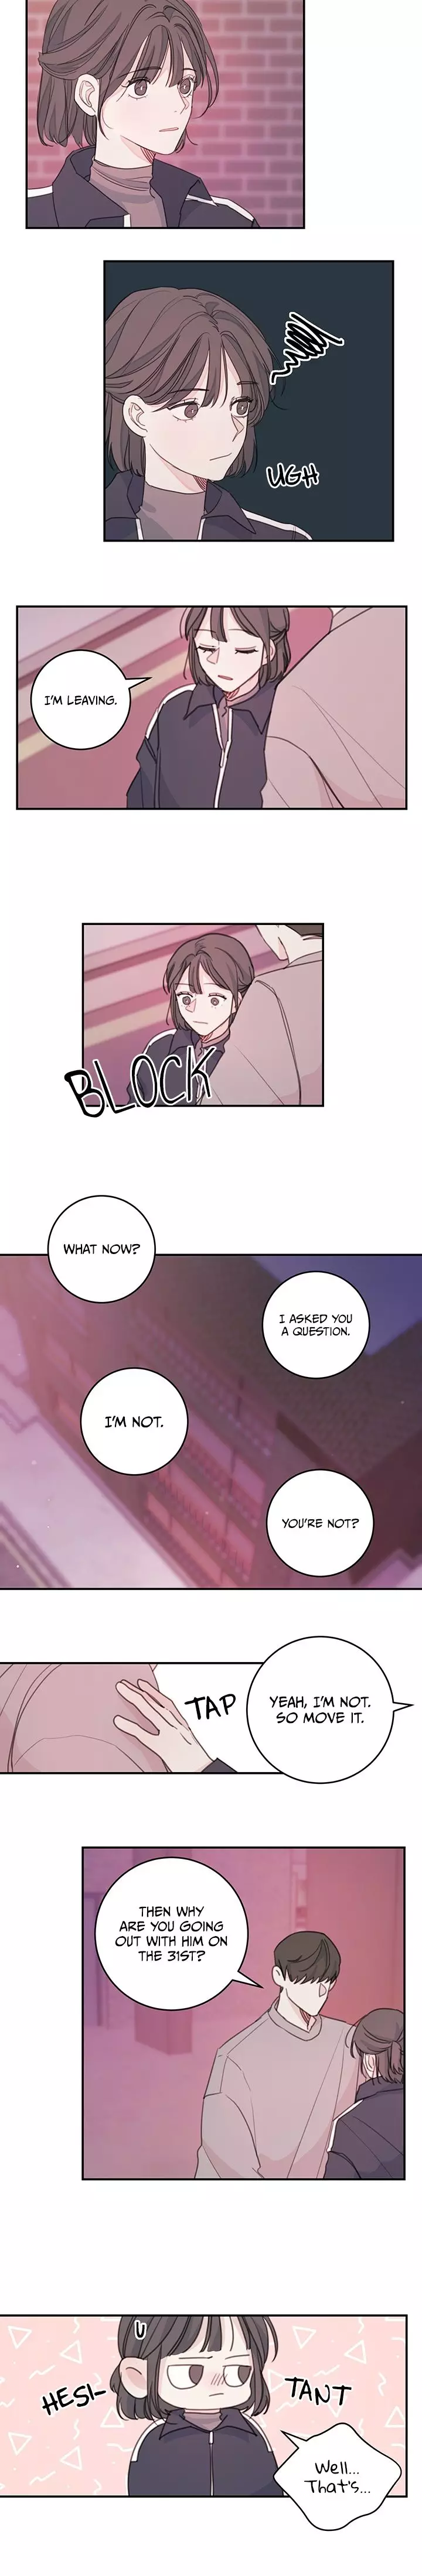 Today Living With You - 6 page 11